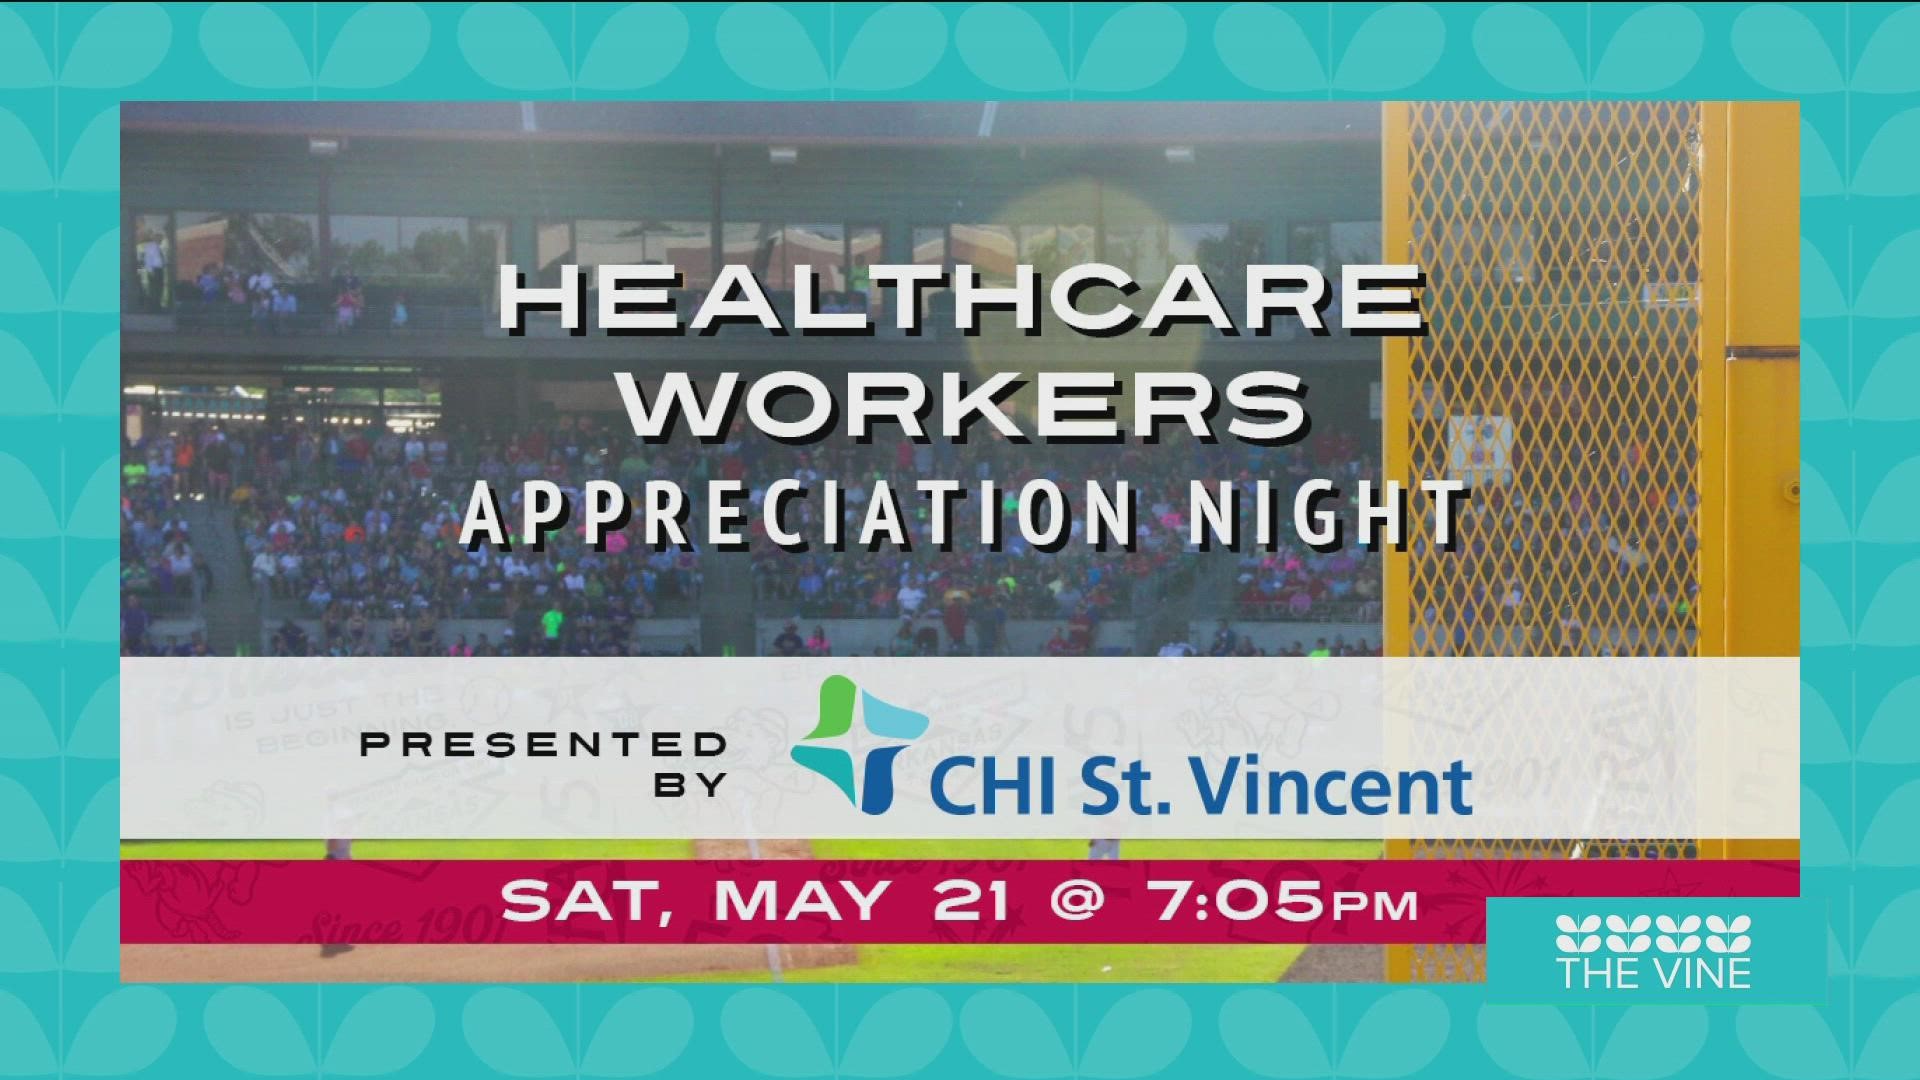 CHI St. Vincent and Arkansas Rravelers are teaming up to show their appreciation for healthcare workers.